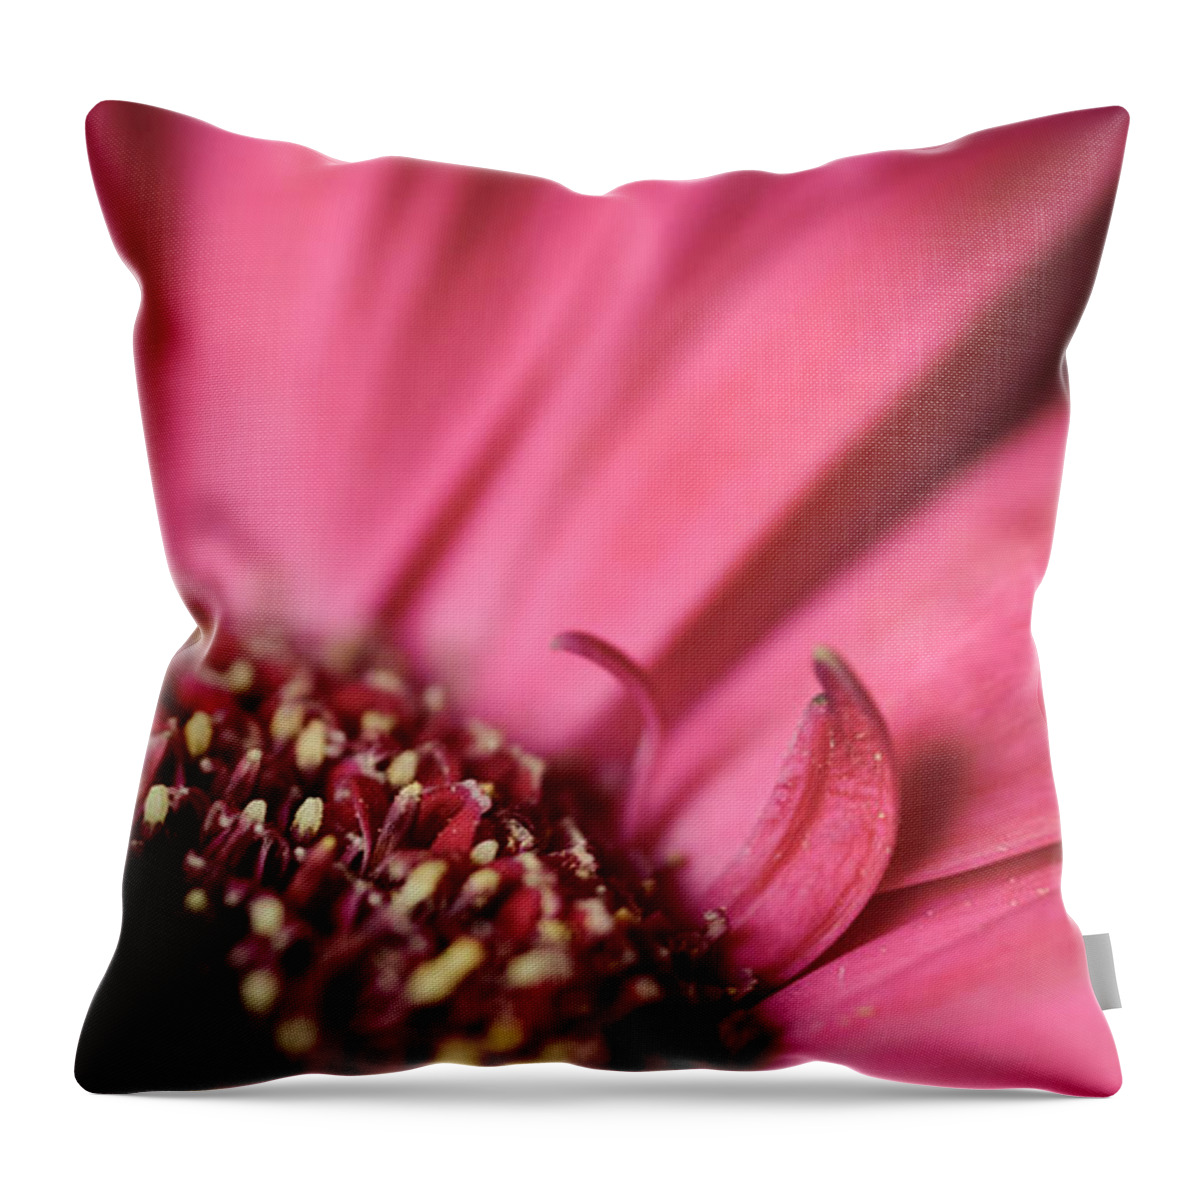 2x1 Throw Pillow featuring the photograph Soft Pink Gerbera Blossom by Hannes Cmarits